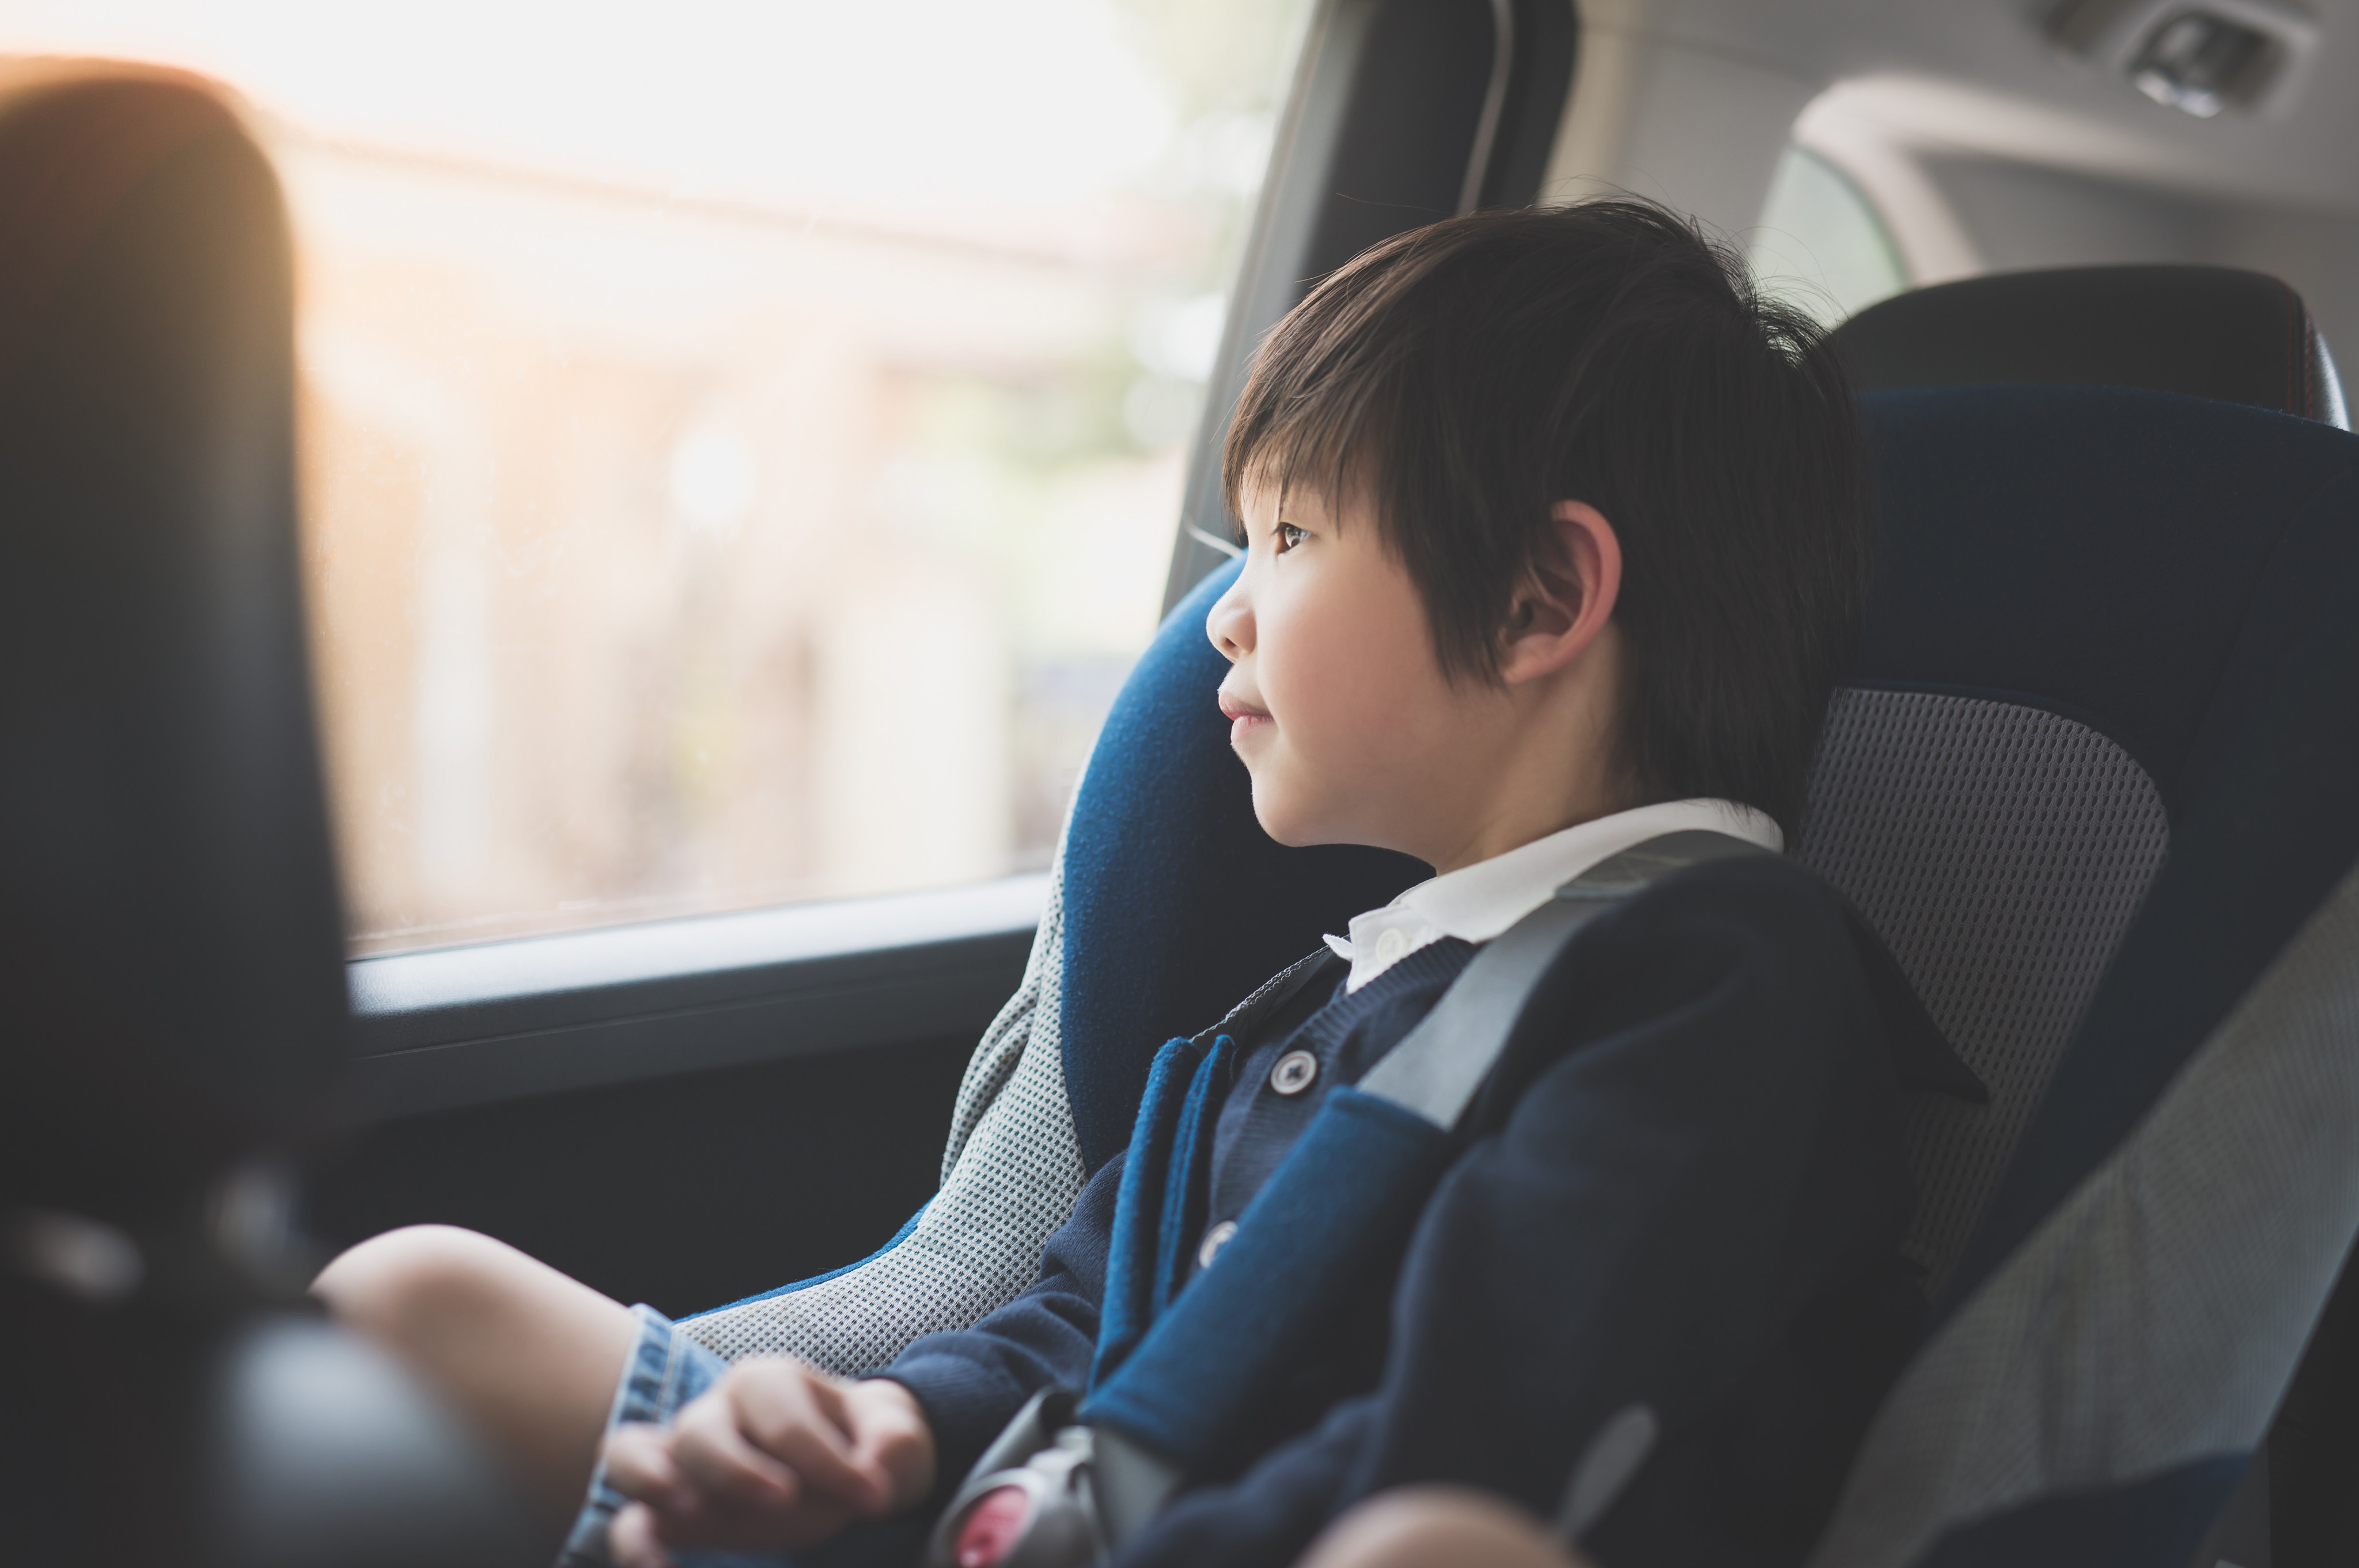 A proposed Hong Kong rule would require infant and toddler car seats for youngsters in private cars and seat belts for older children. Photo: Shutterstock